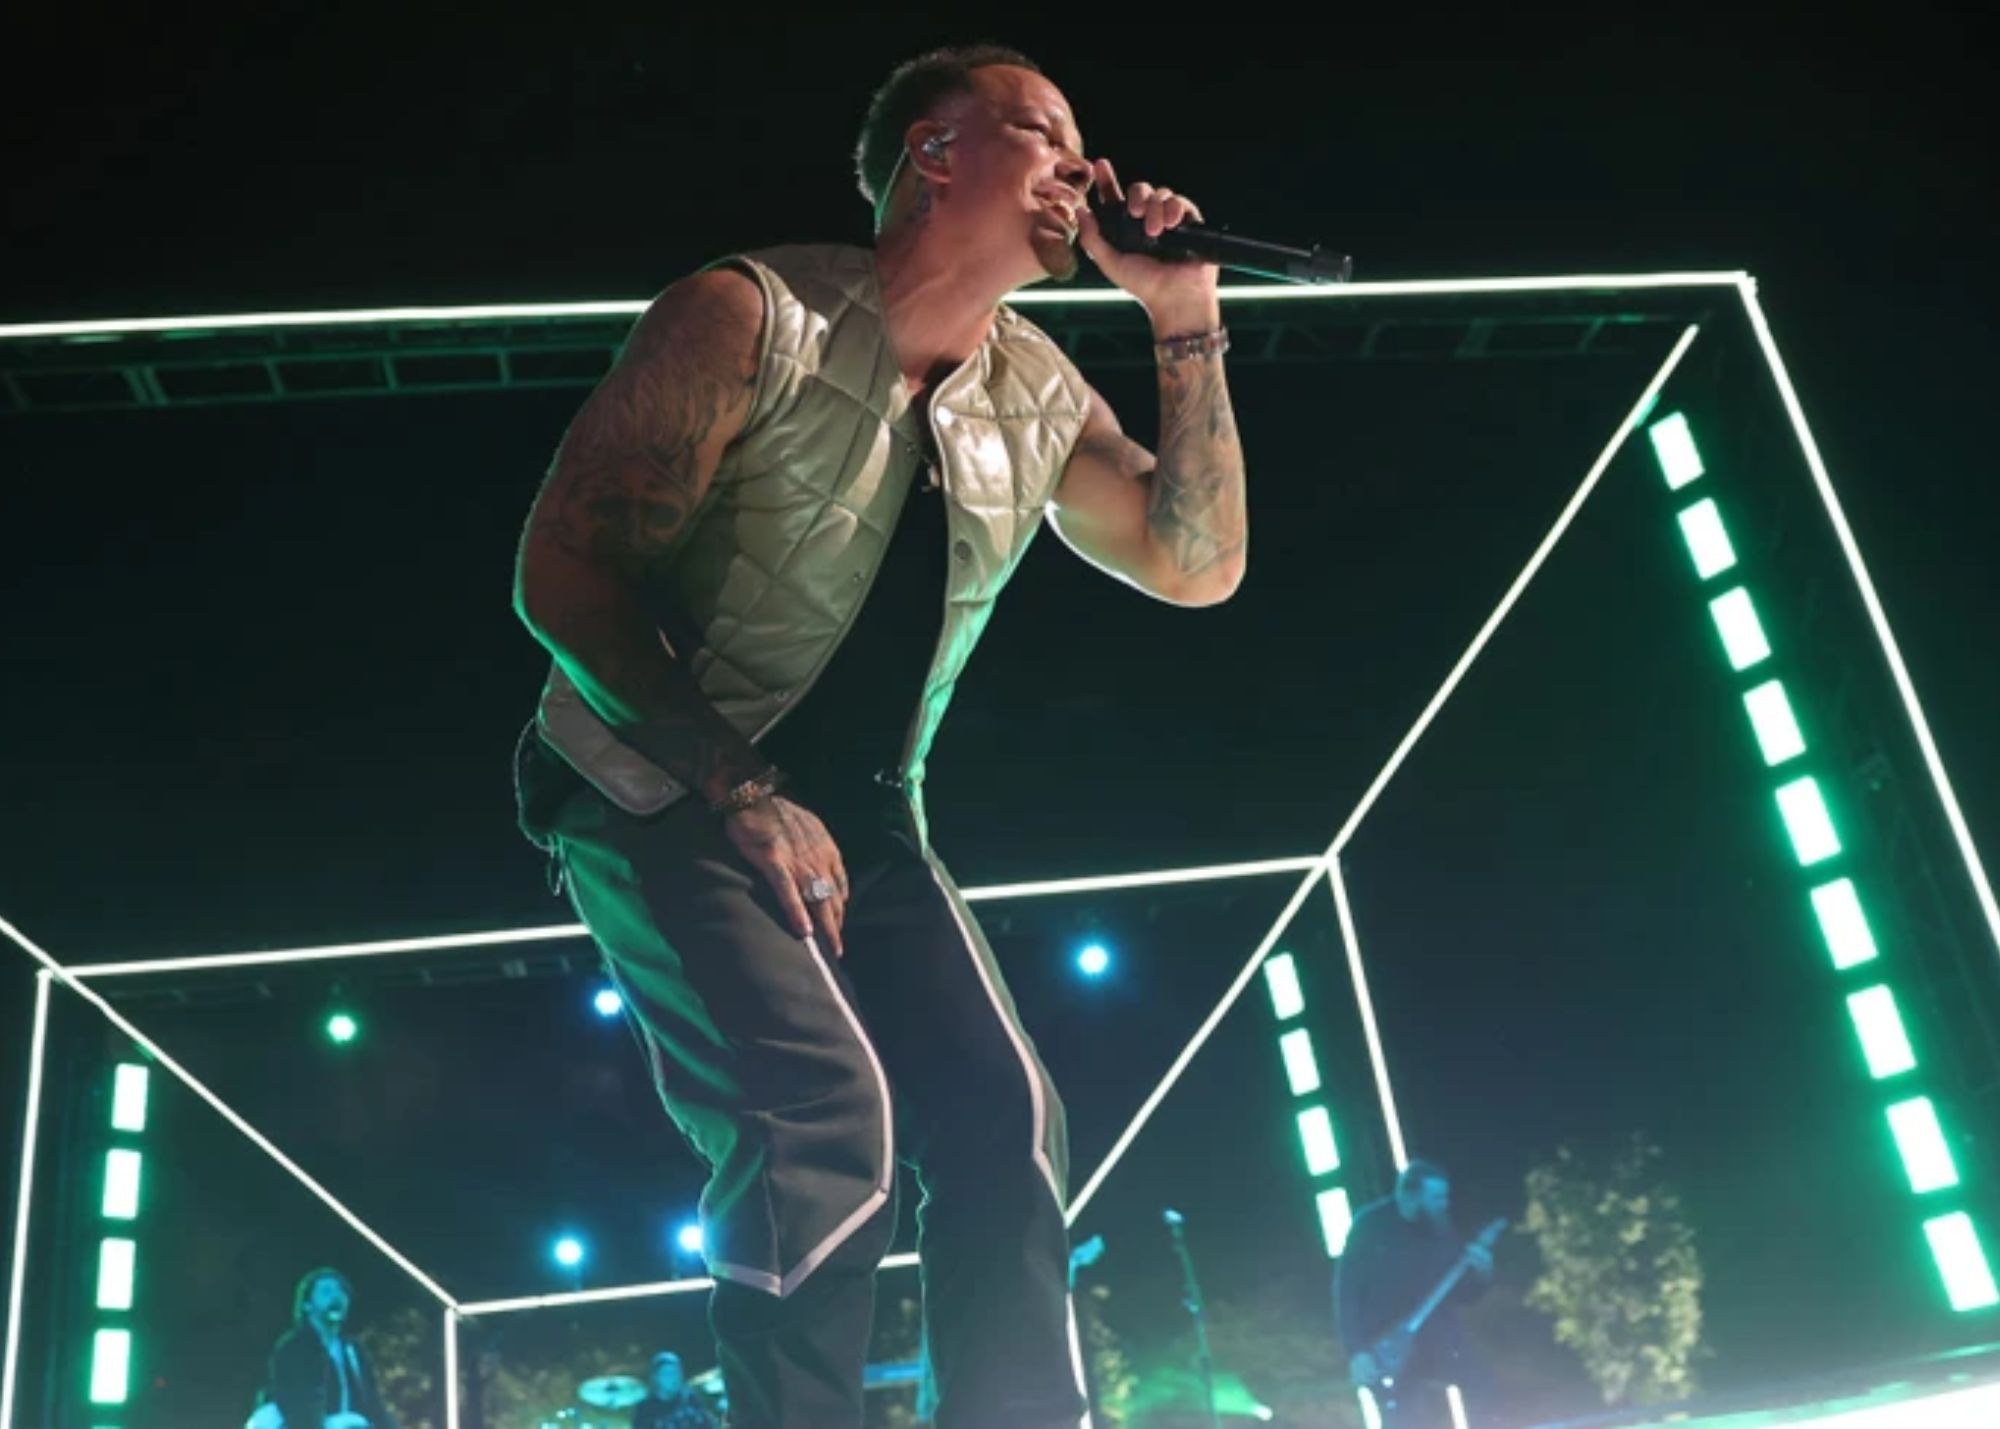 Kane Brown is performing on stage, surrounded by bright neon lights